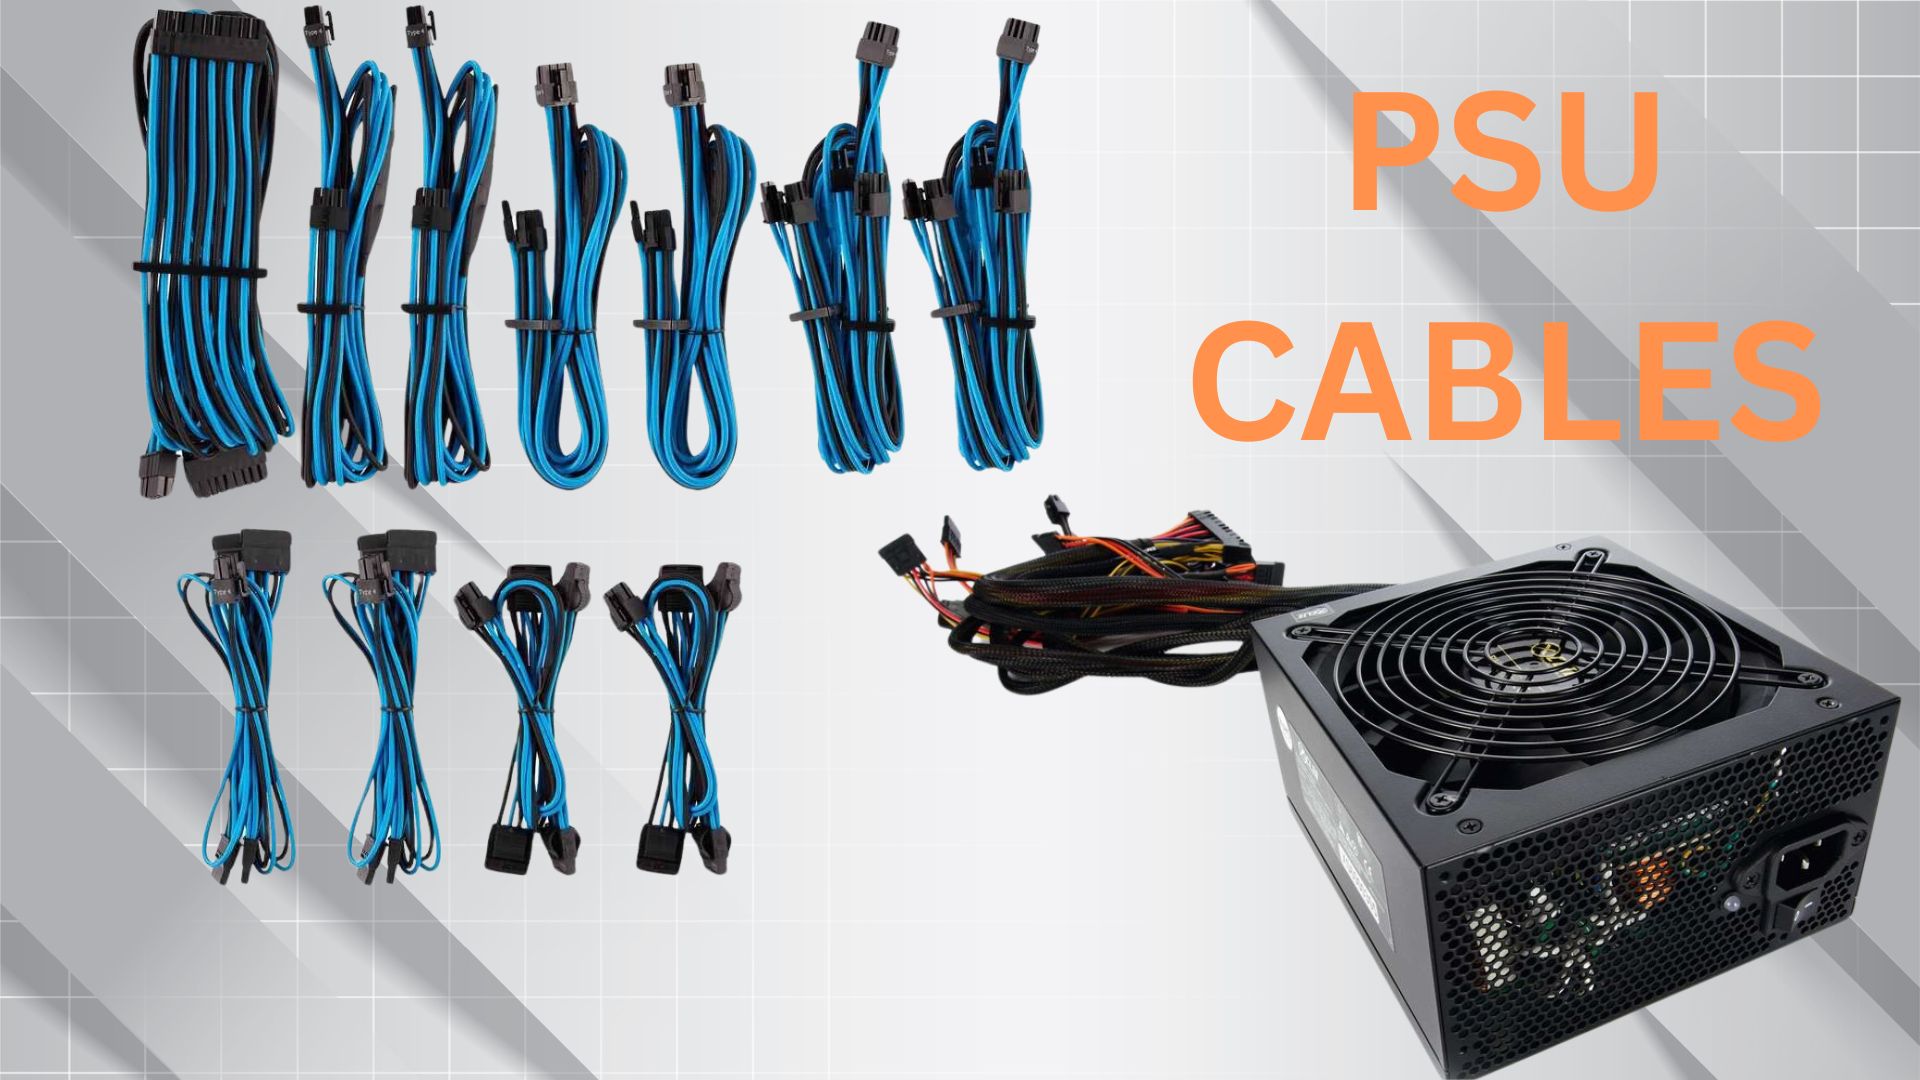 Which PSU Cables Do I Need